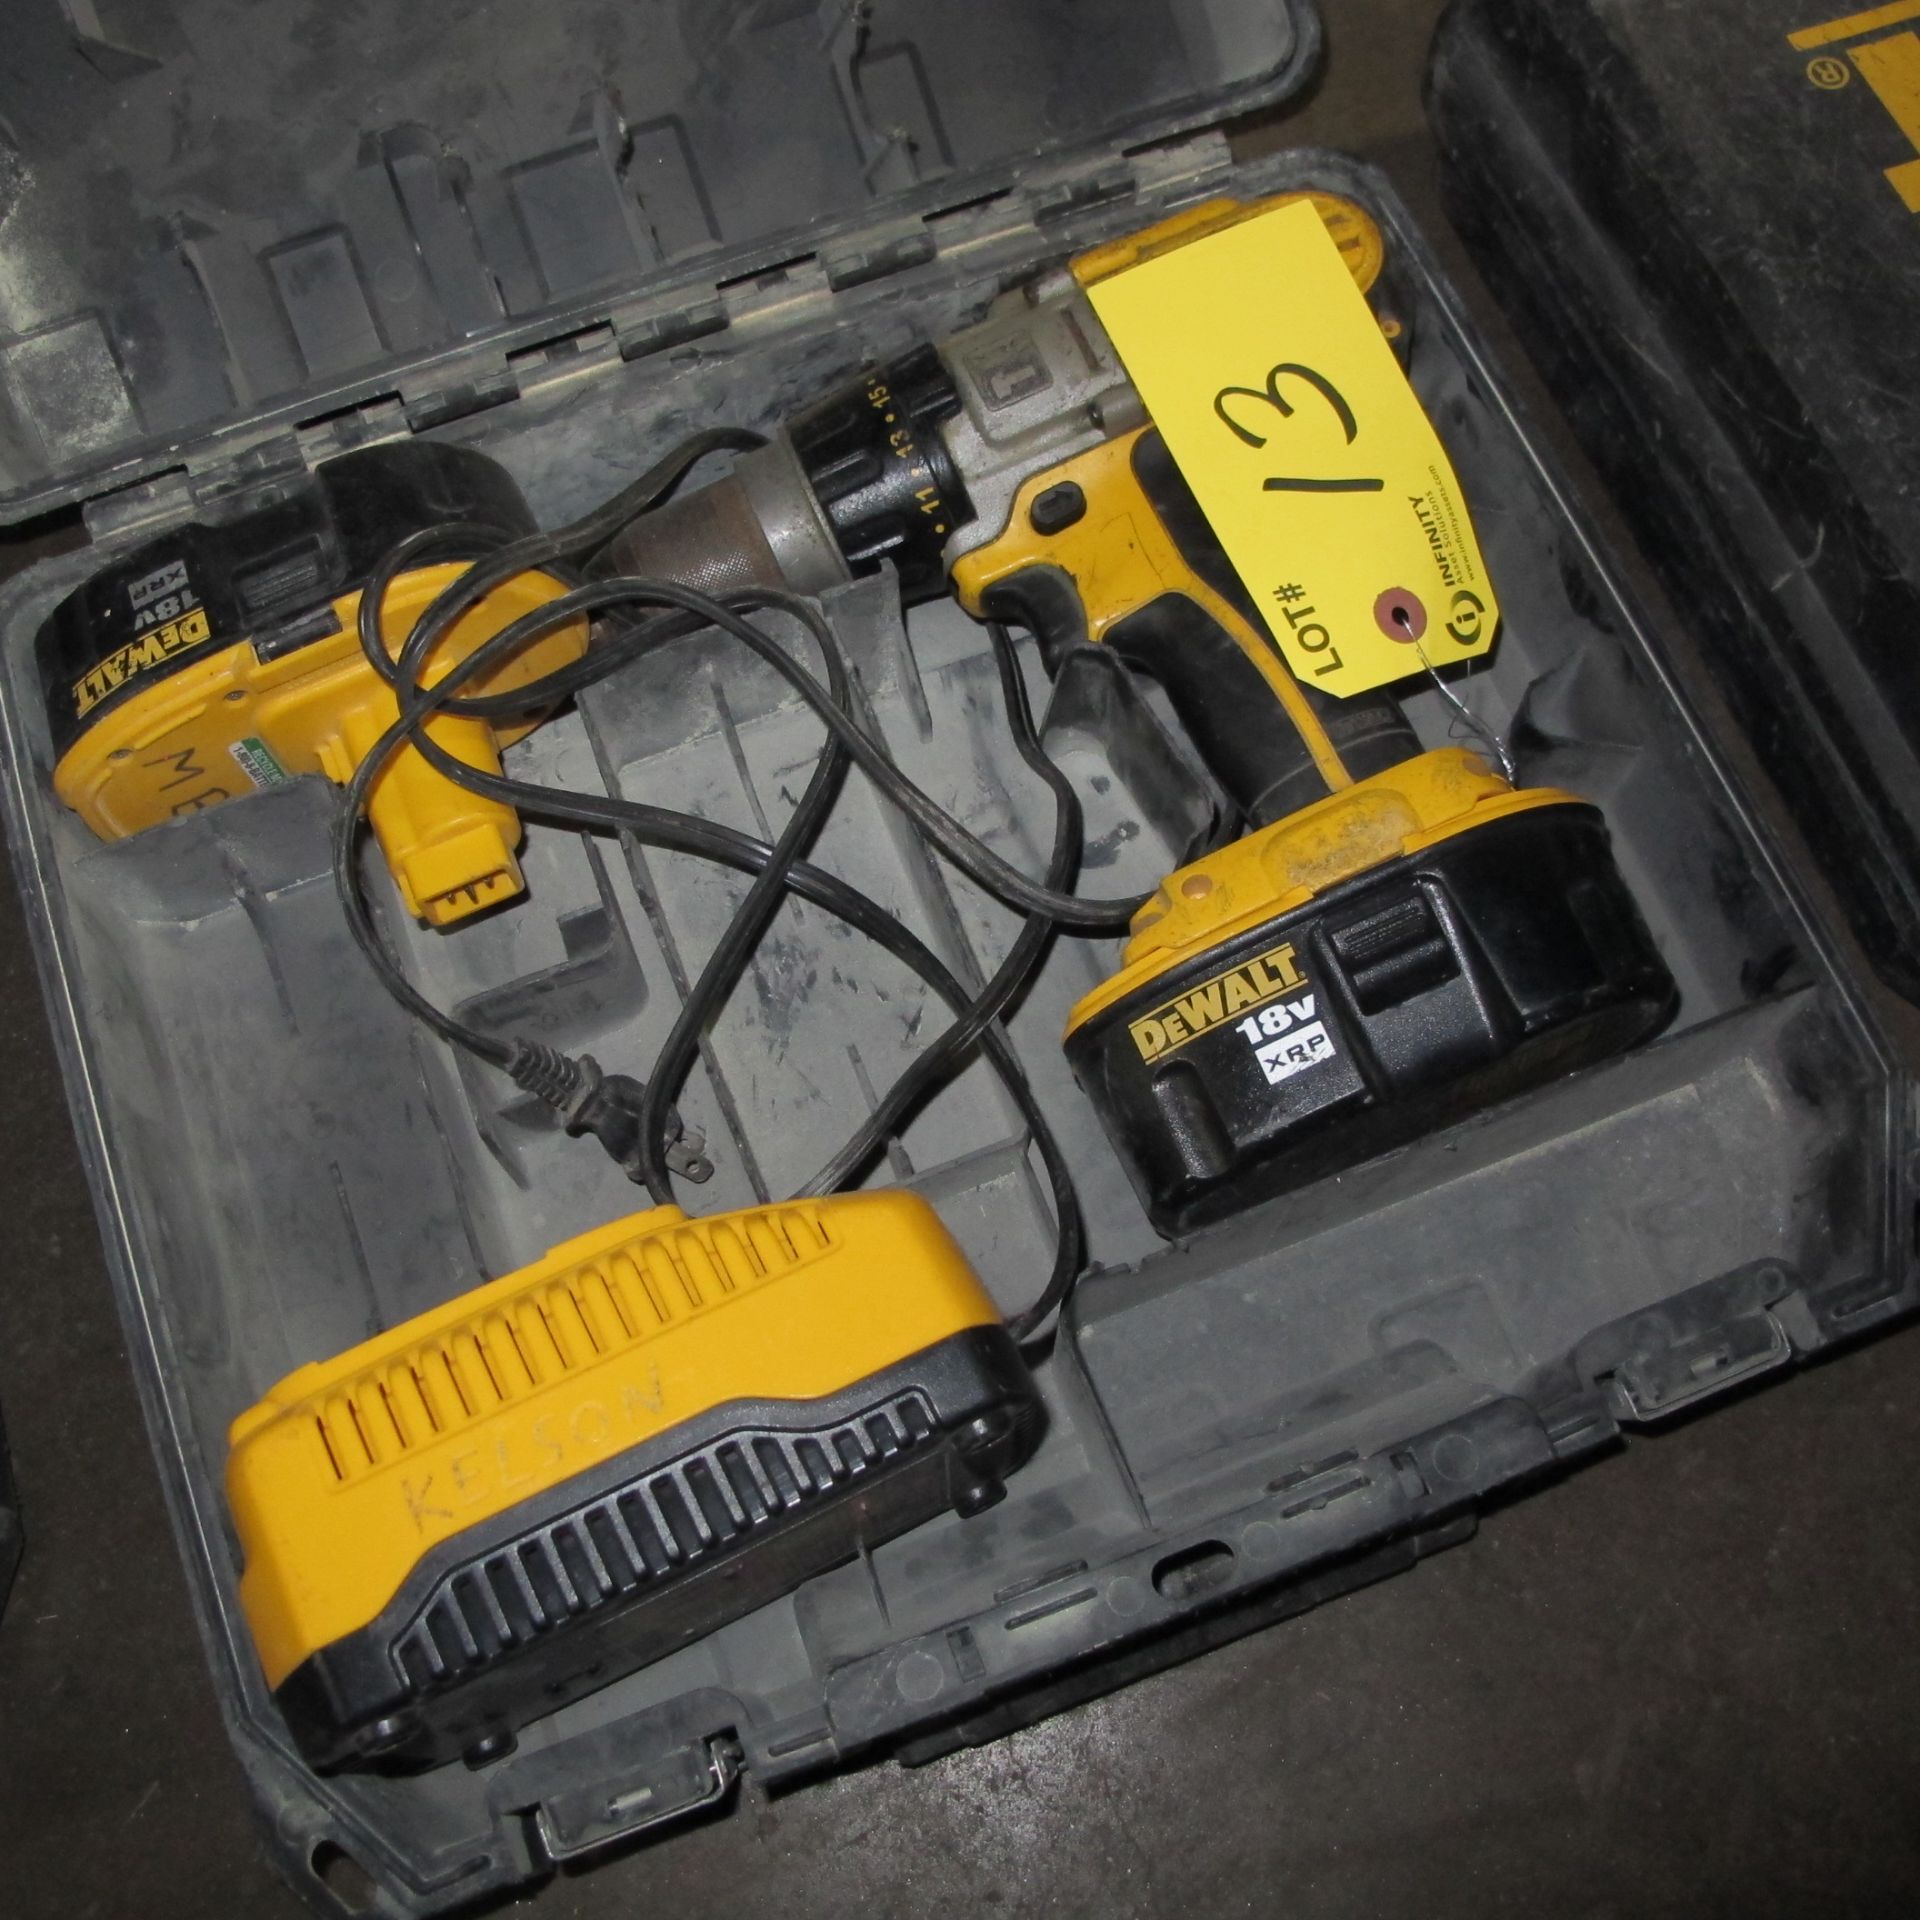 DEWALT DCD950 CORDLESS DRILL W/ (2) 18V BATTERIES, CHARGER AND CASE